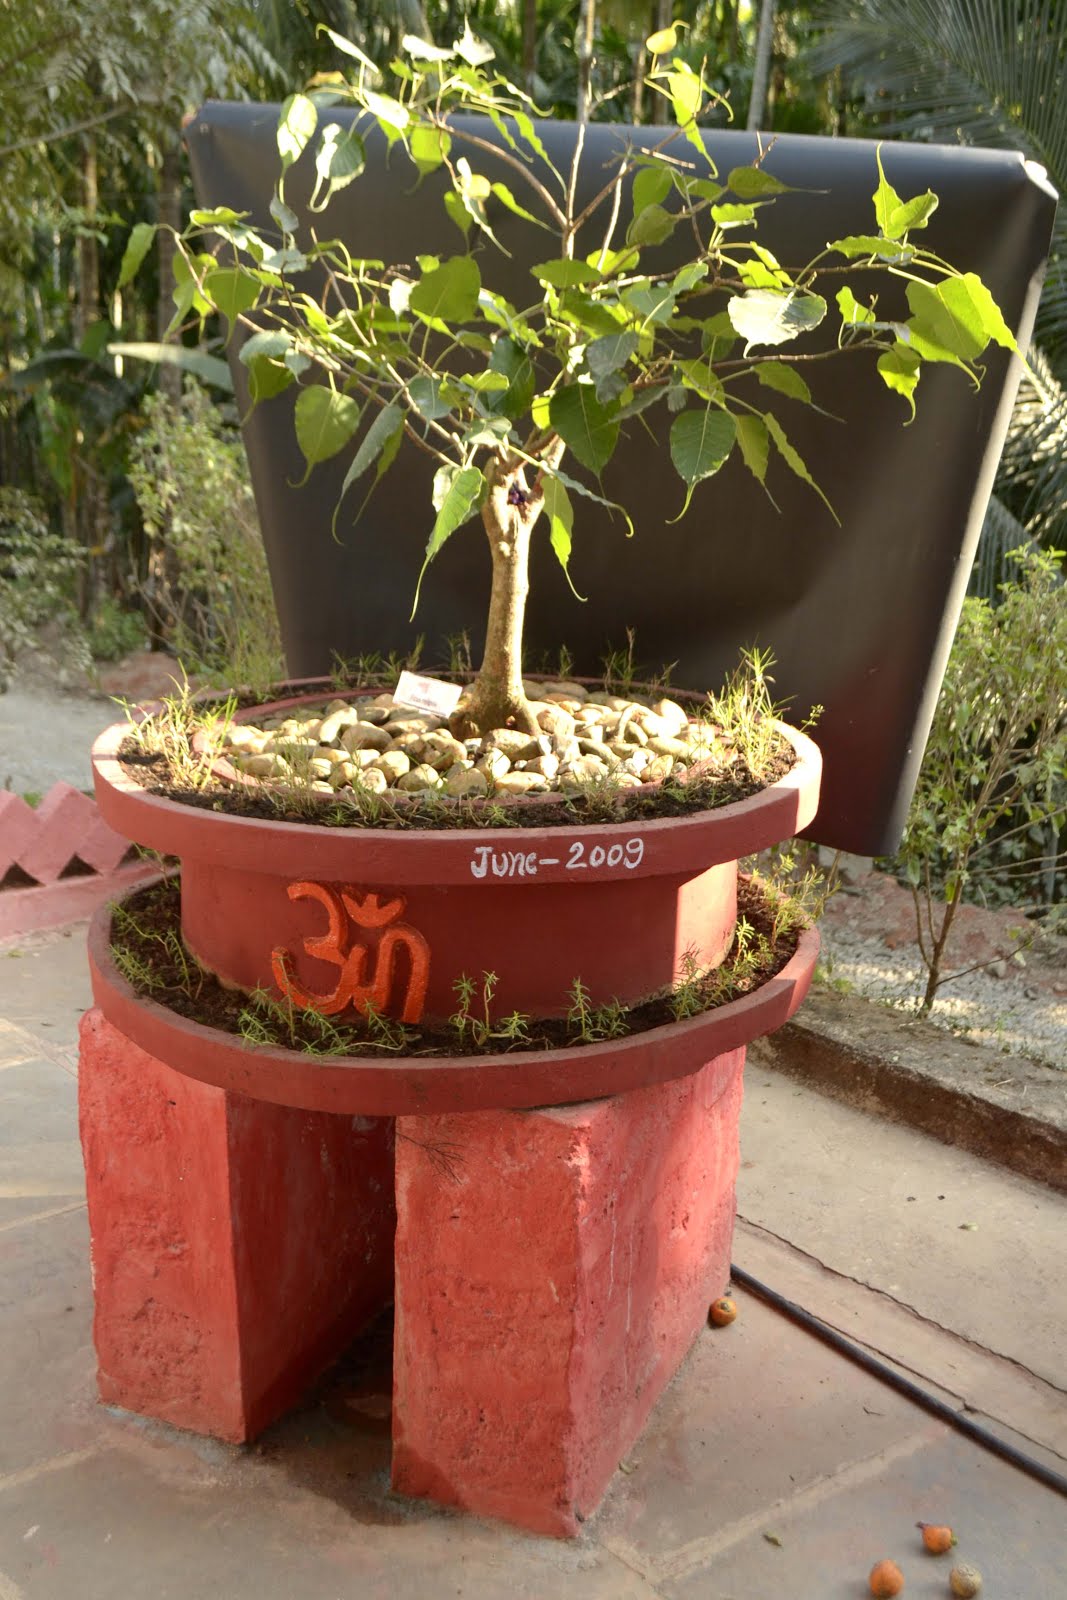 For Religious Bonsai Tree which is lucky for you